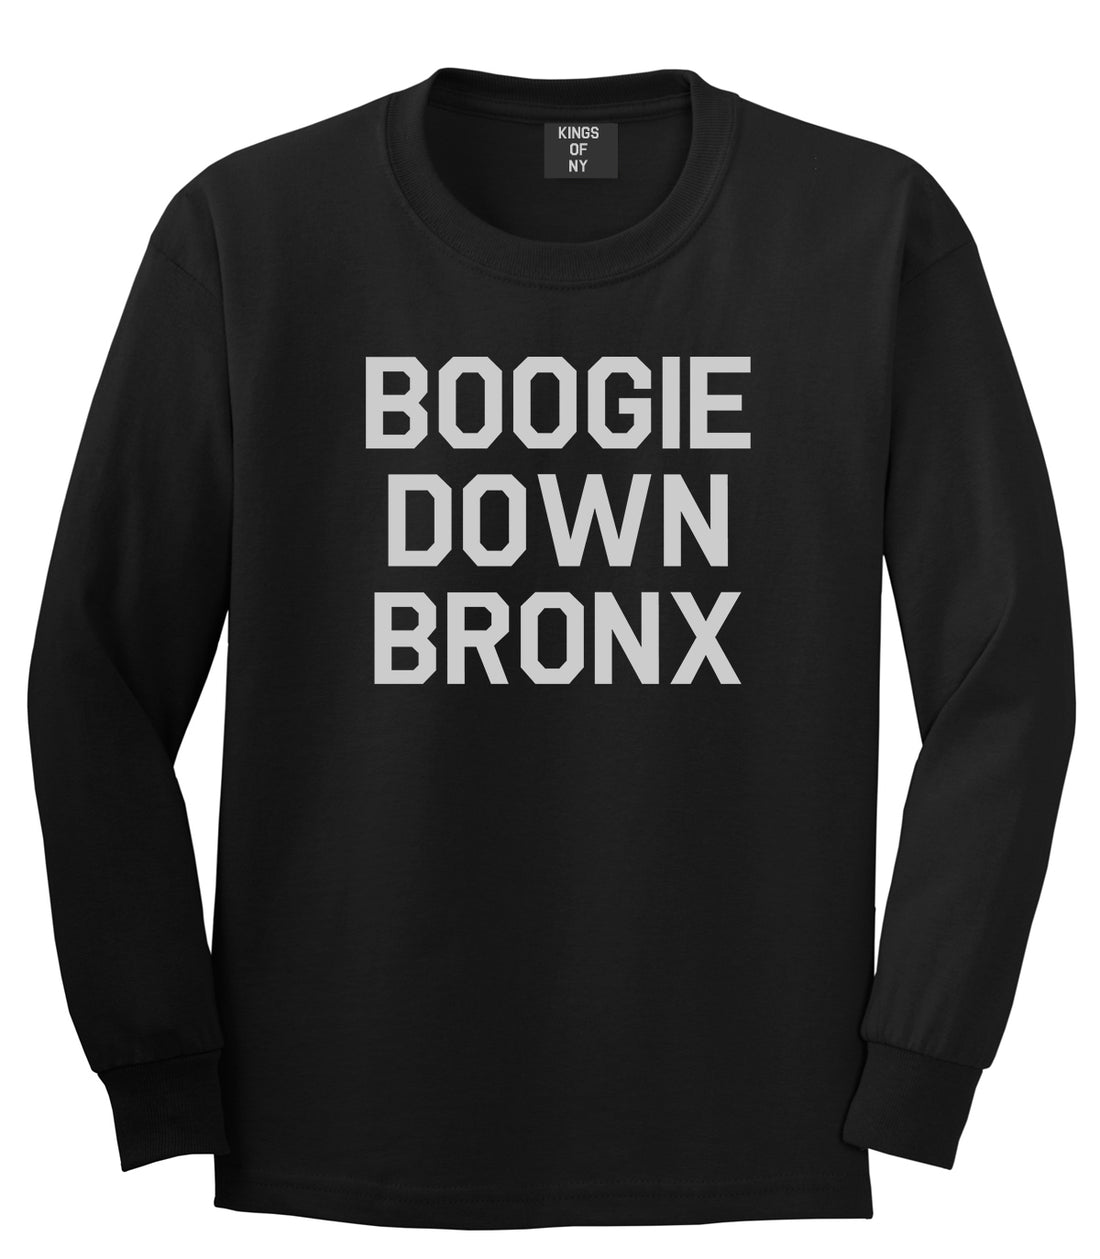 Boogie Down Bronx Mens Long Sleeve T-Shirt Black by Kings Of NY